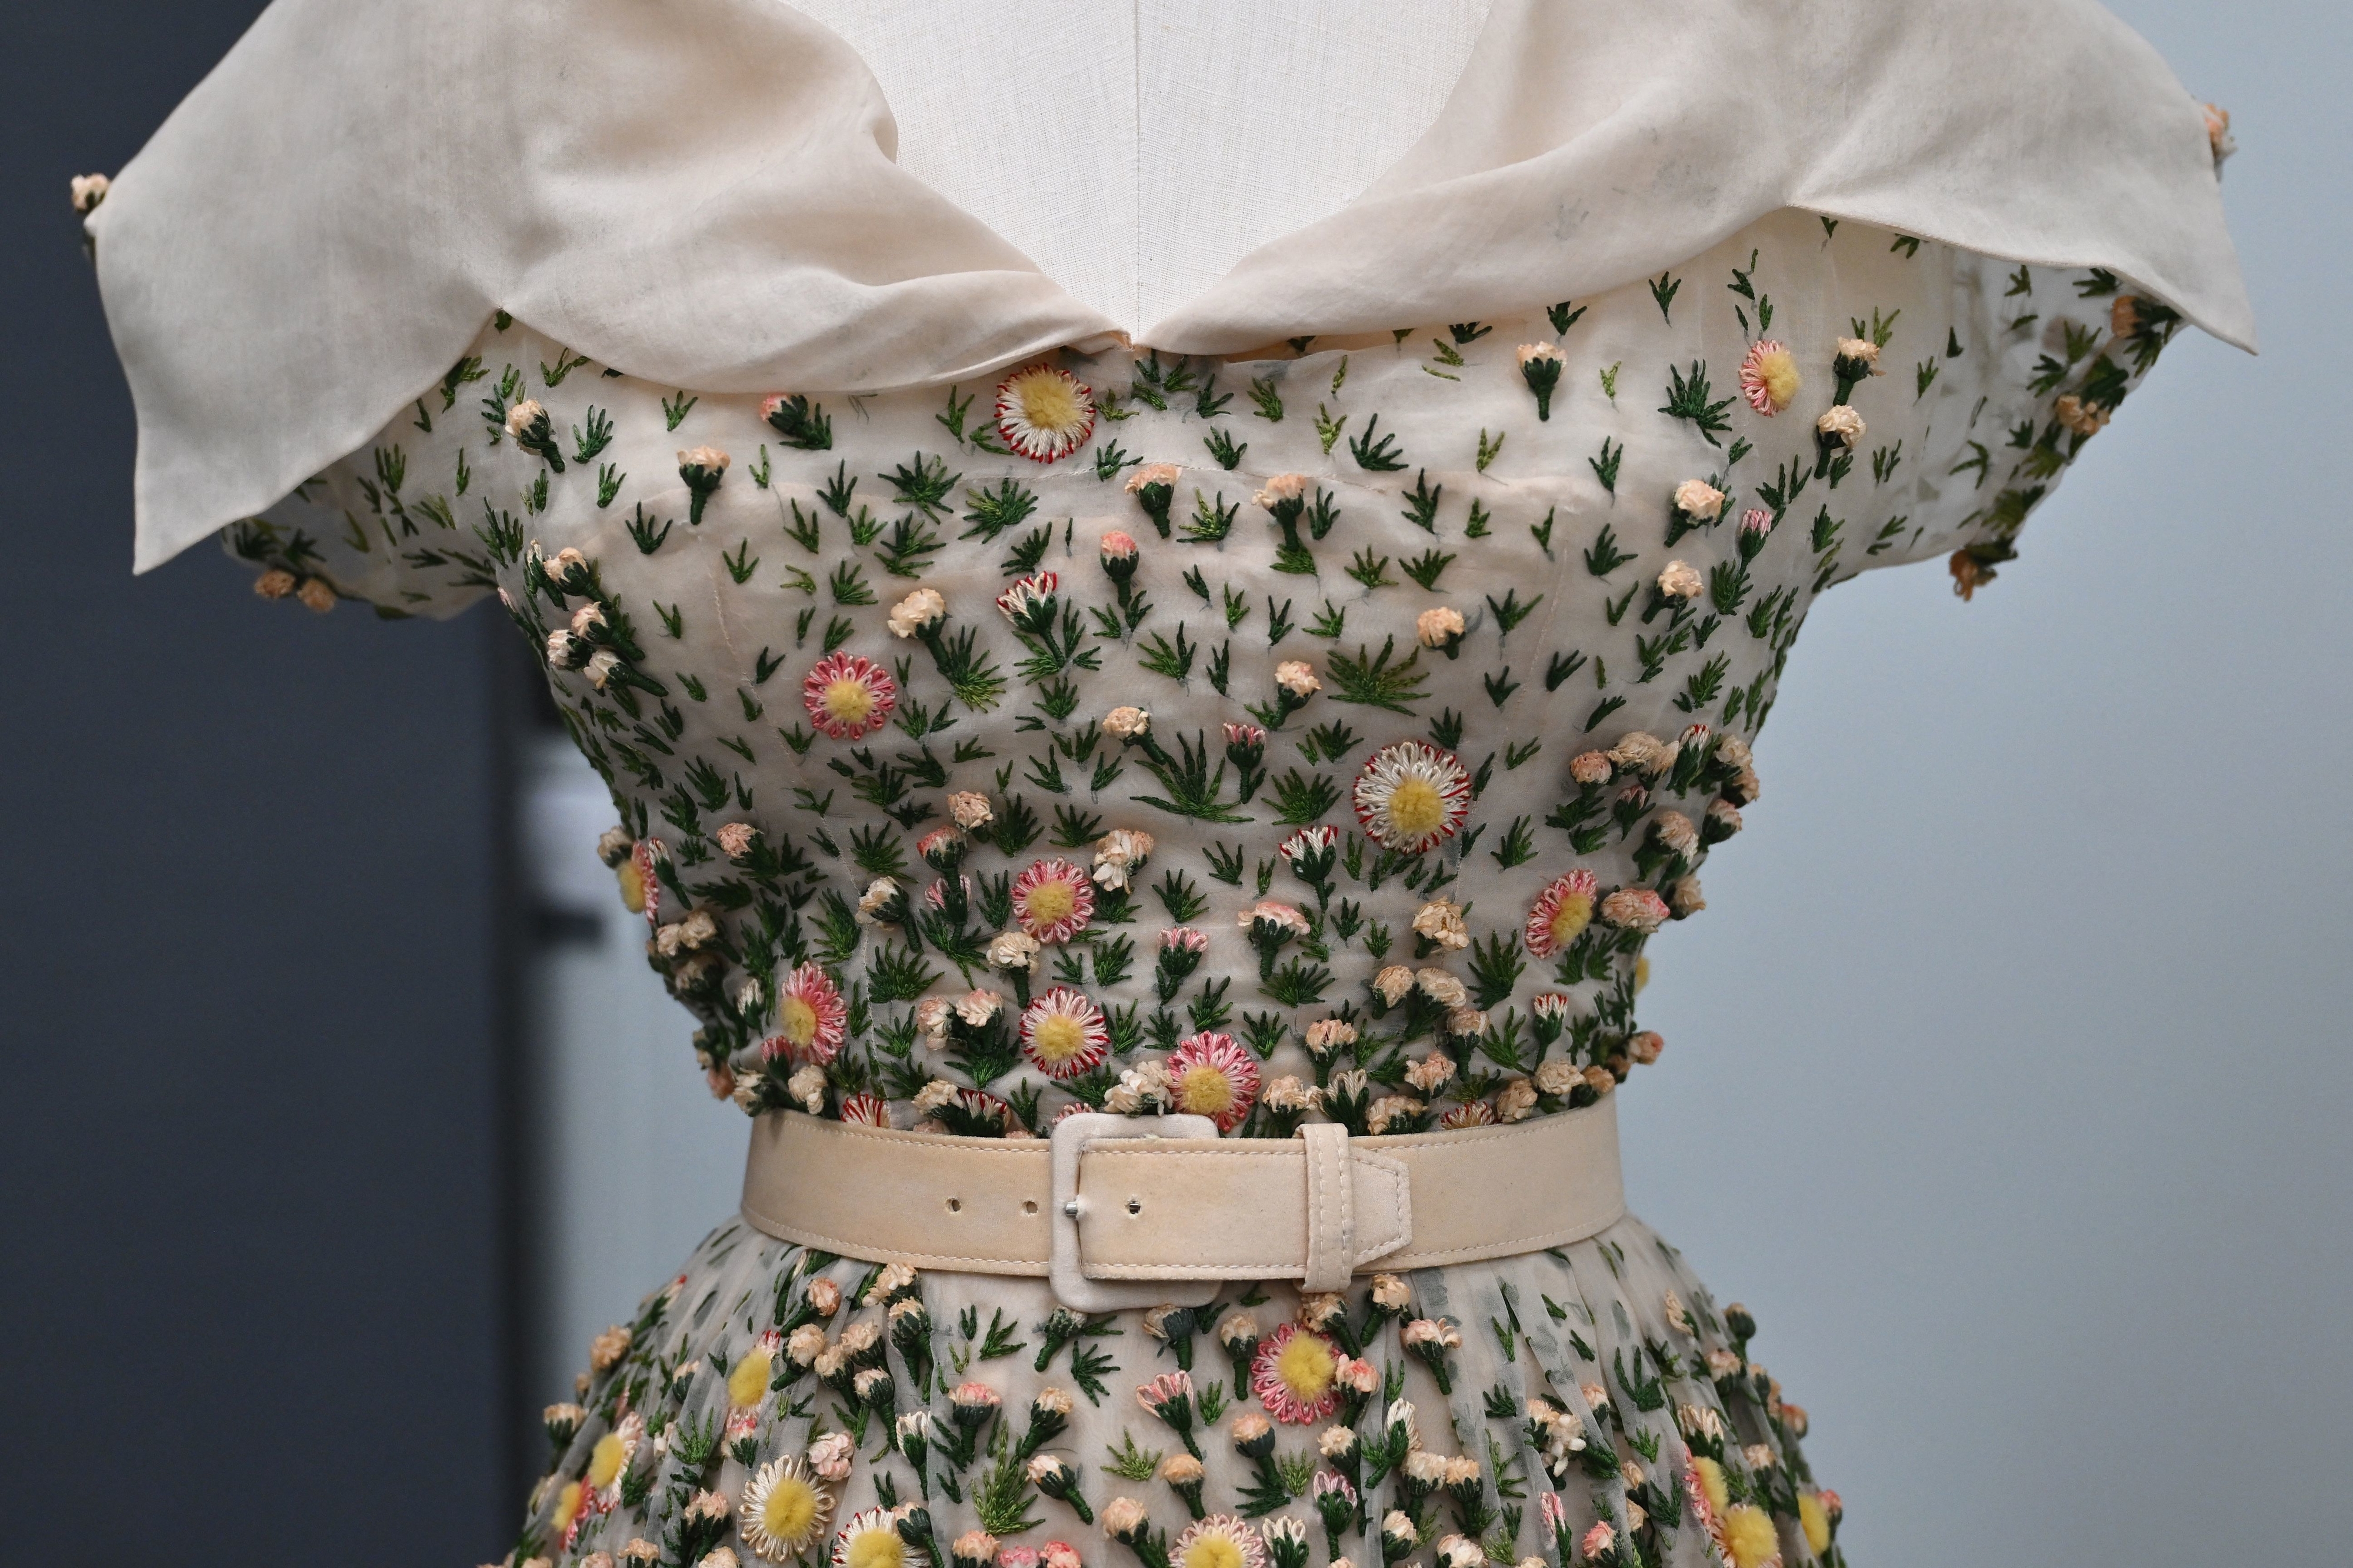 Midsection of a printed dress with a belted waist, showing detail of the garment&#x27;s design and texture